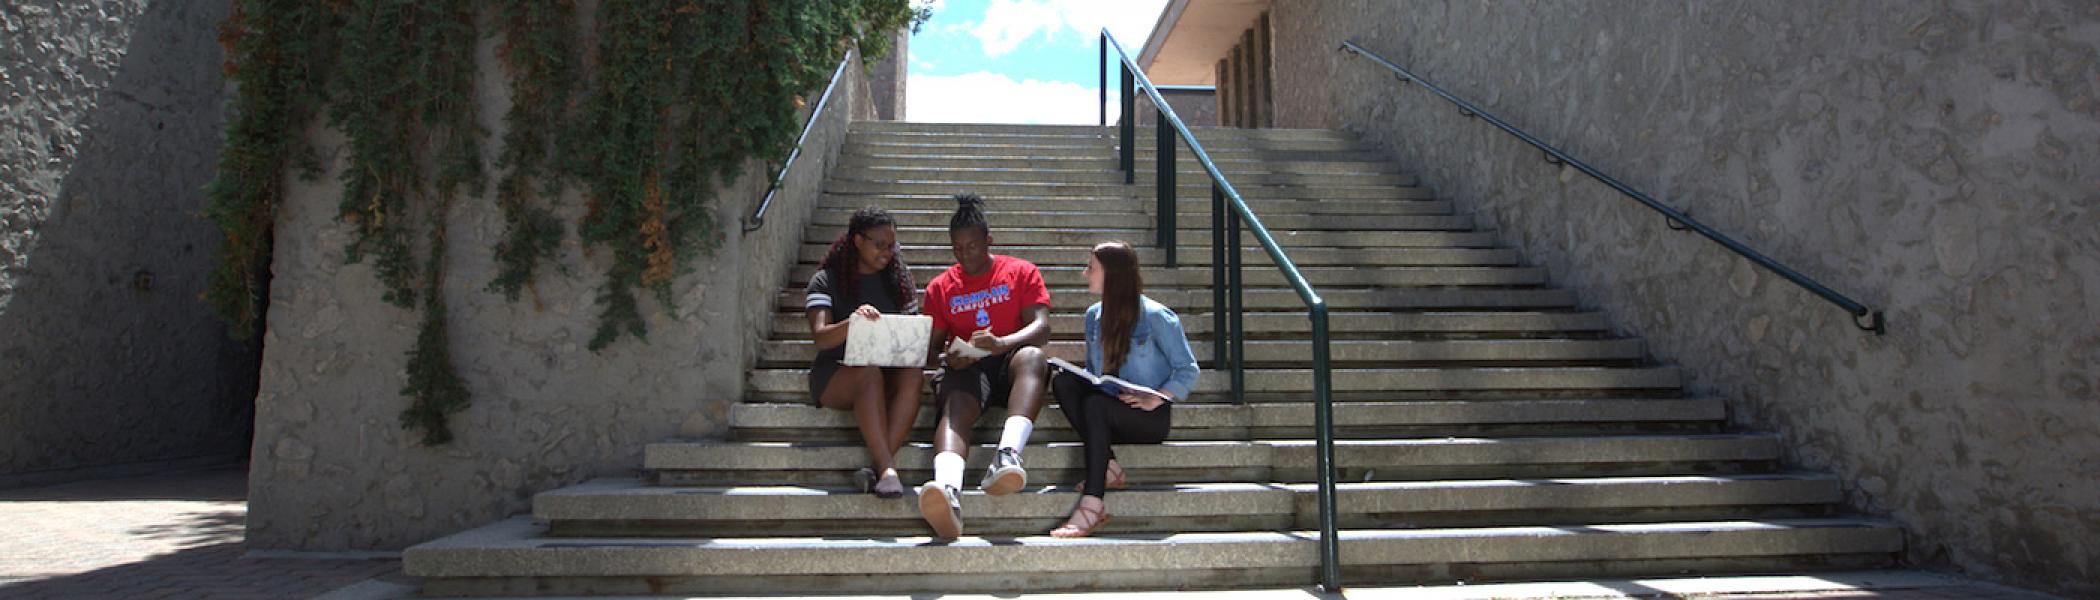 3 students sitting on steps outside working on a laptop